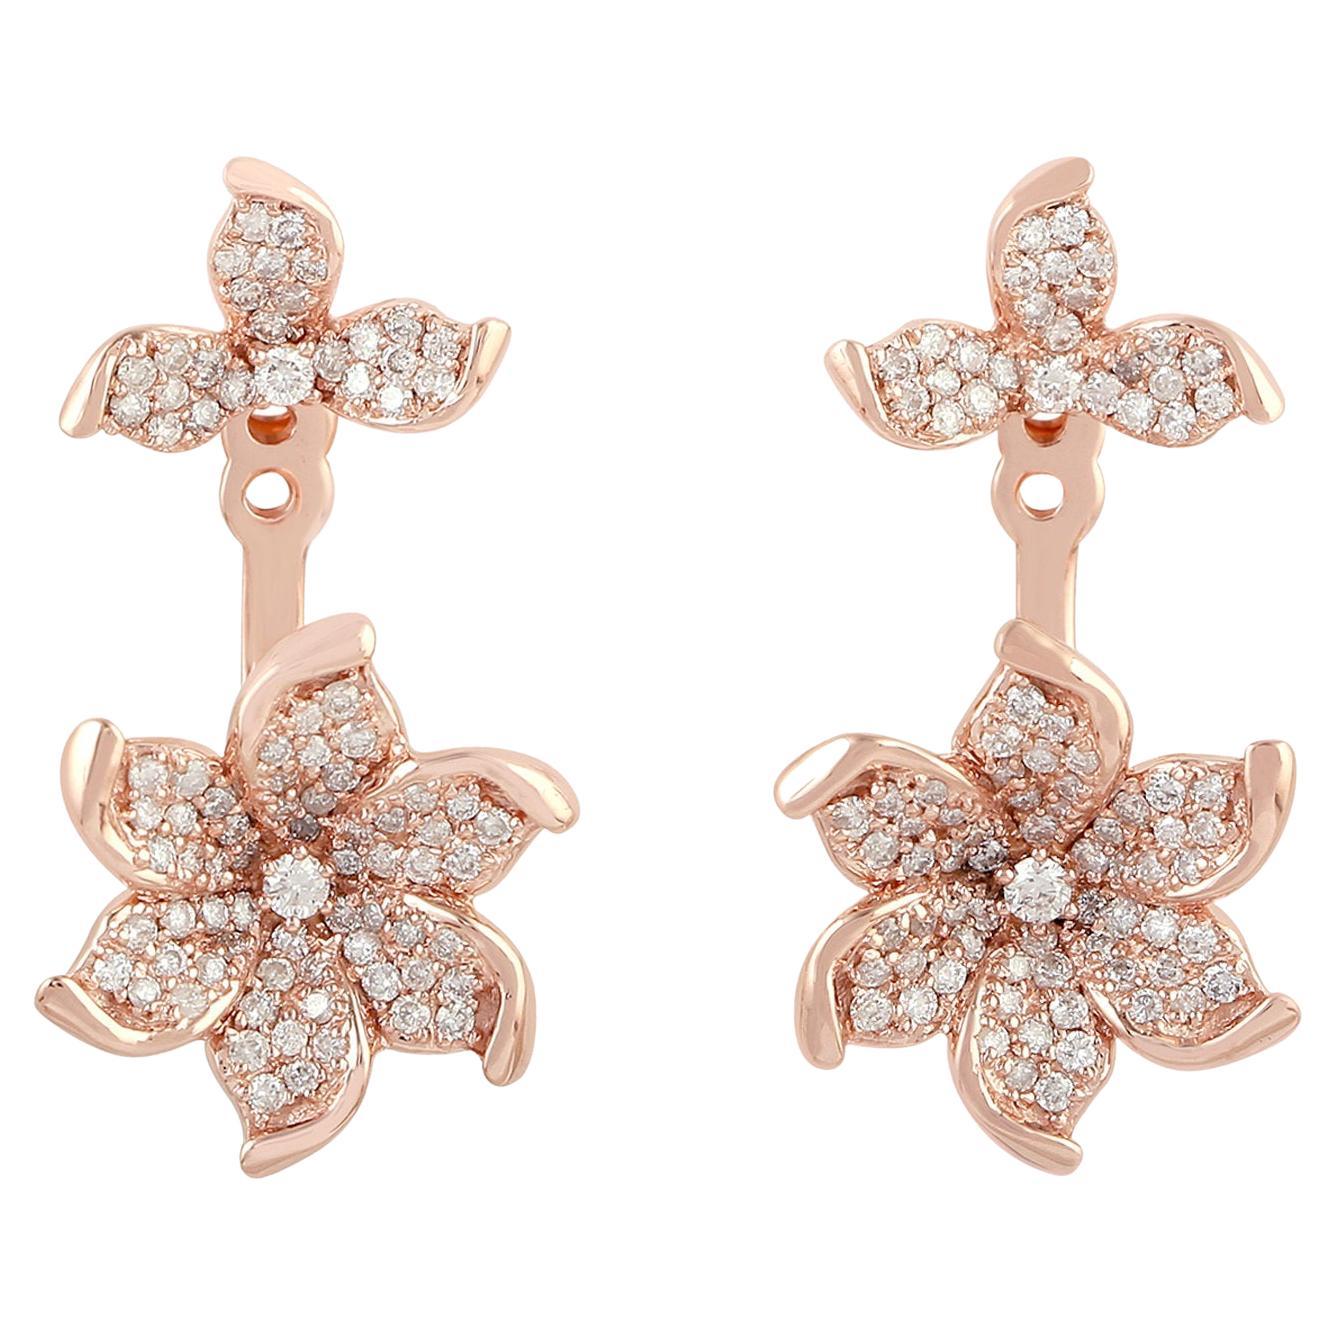 Designer Flower Shaped Earrings with Pave Diamonds Made in 18k Rose Gold For Sale